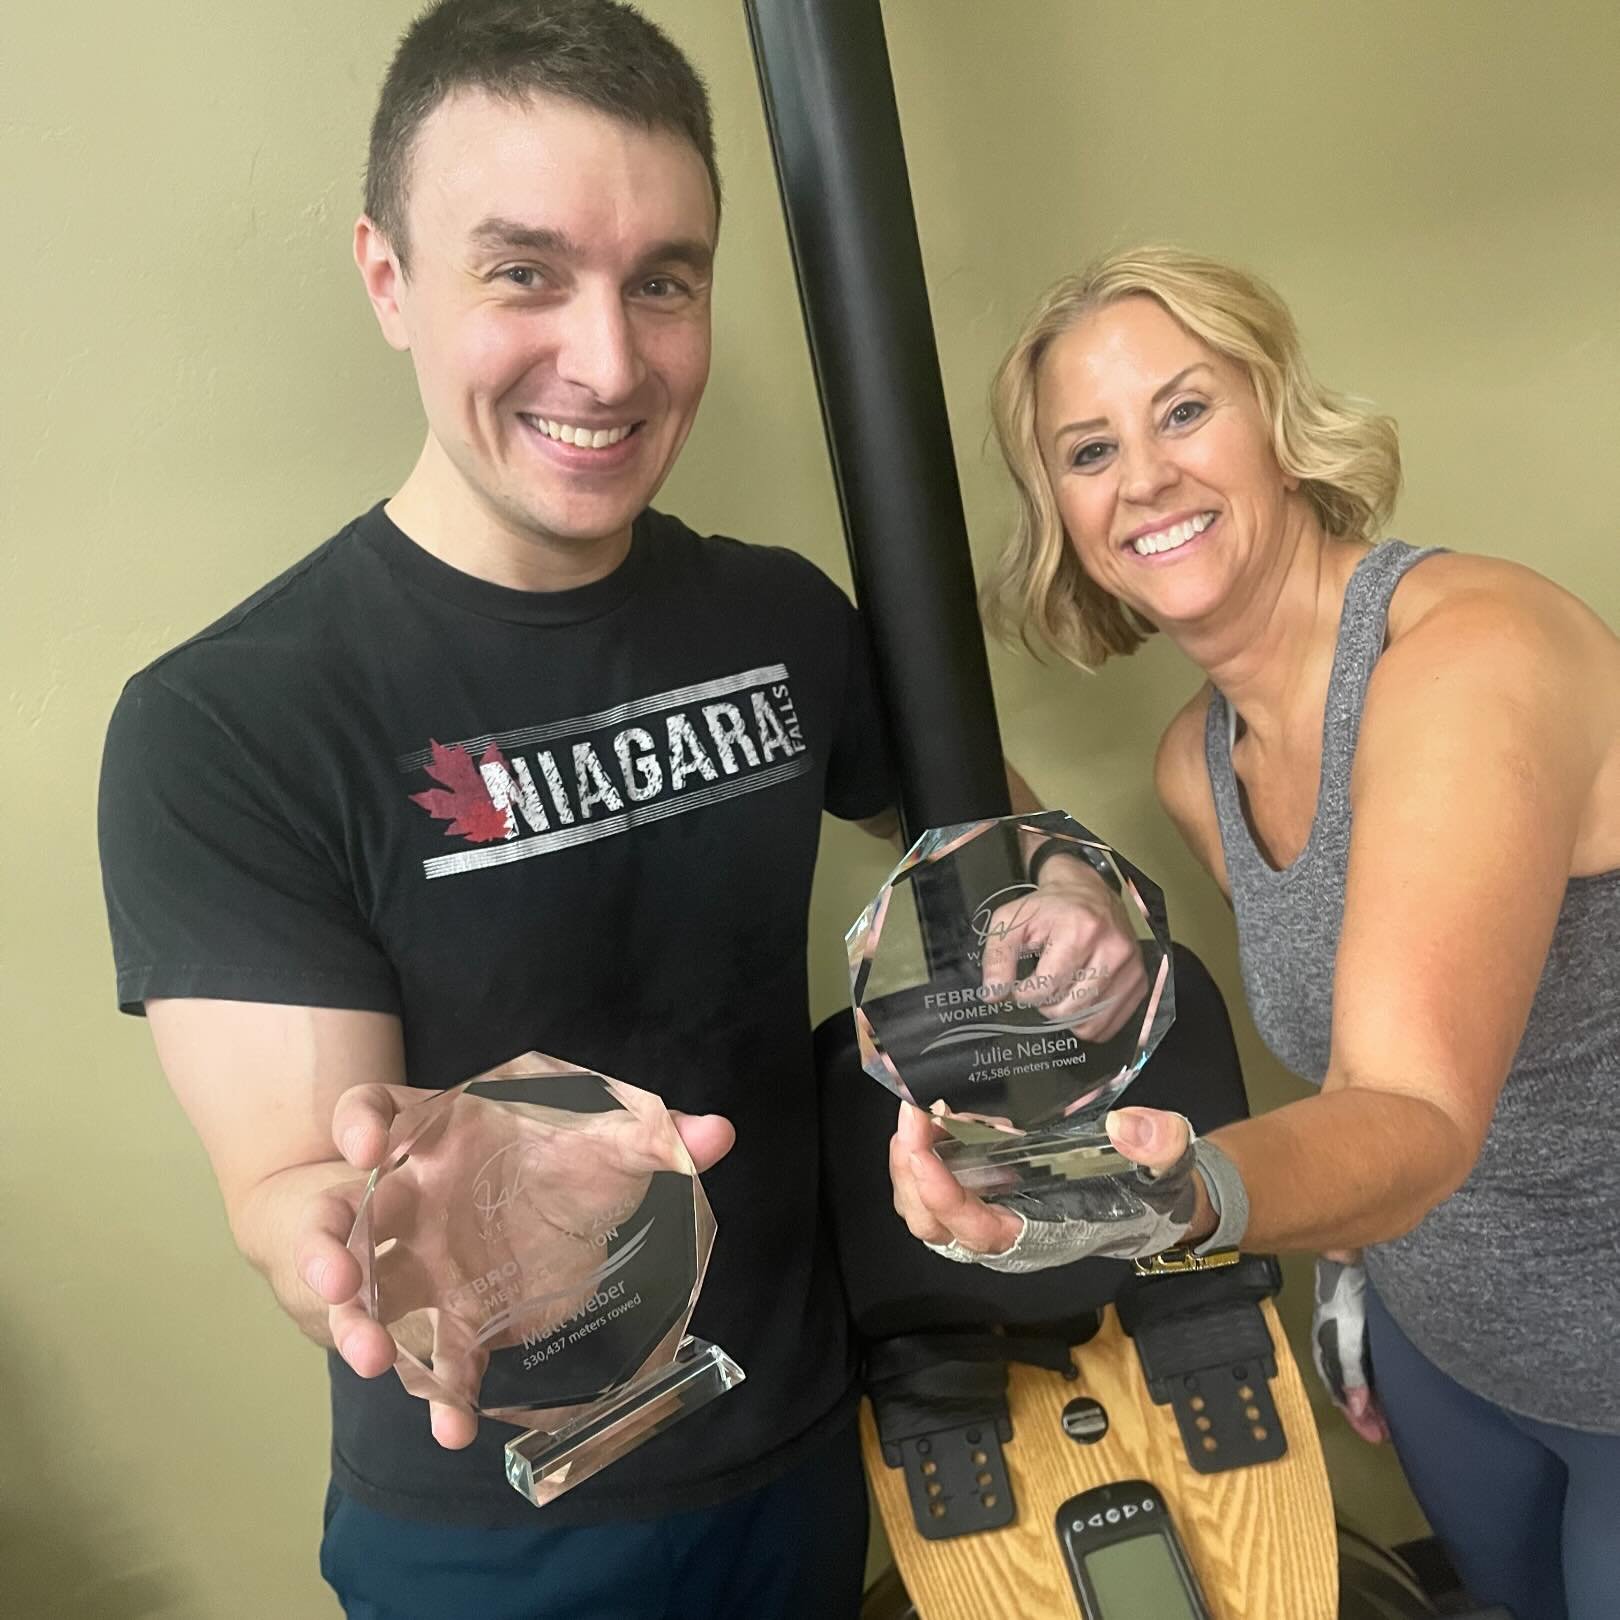 Annnnnnd We got trophies in hand for our FebROWrary most meters towed winners. Once again - CONGRATULATIONS Julie and Matt!!!